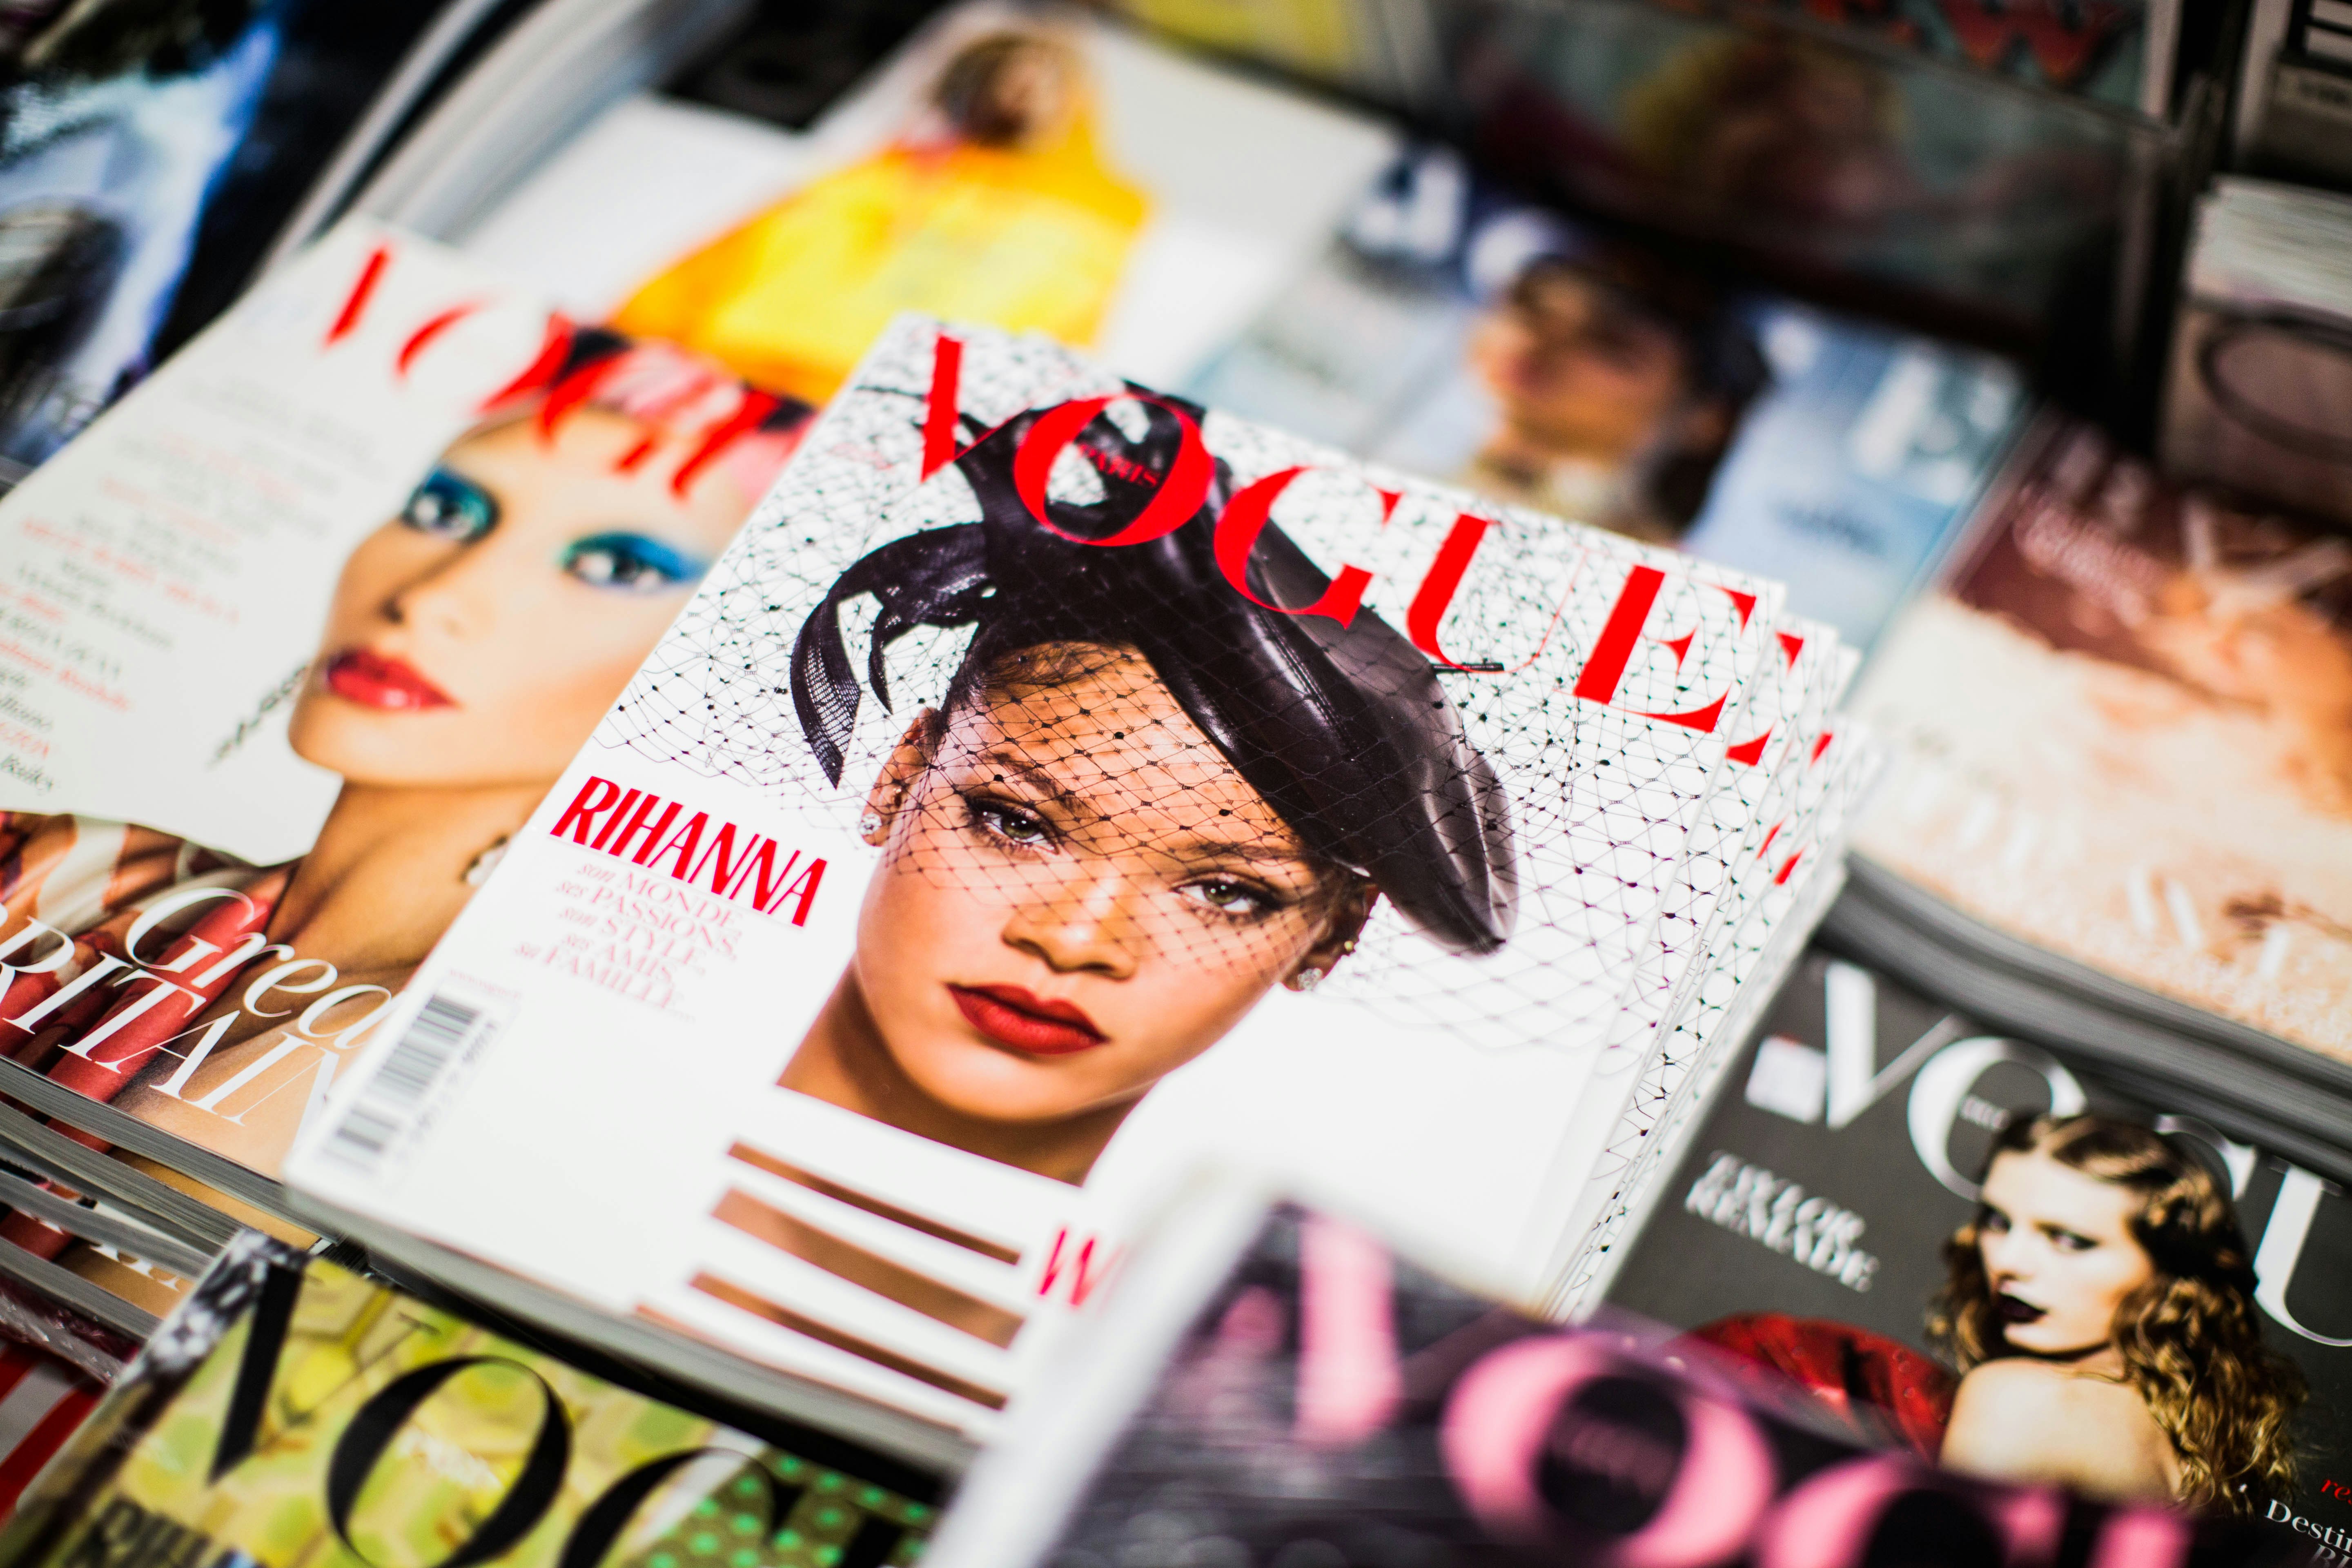 How Long Can Legacy Fashion Magazines Survive?